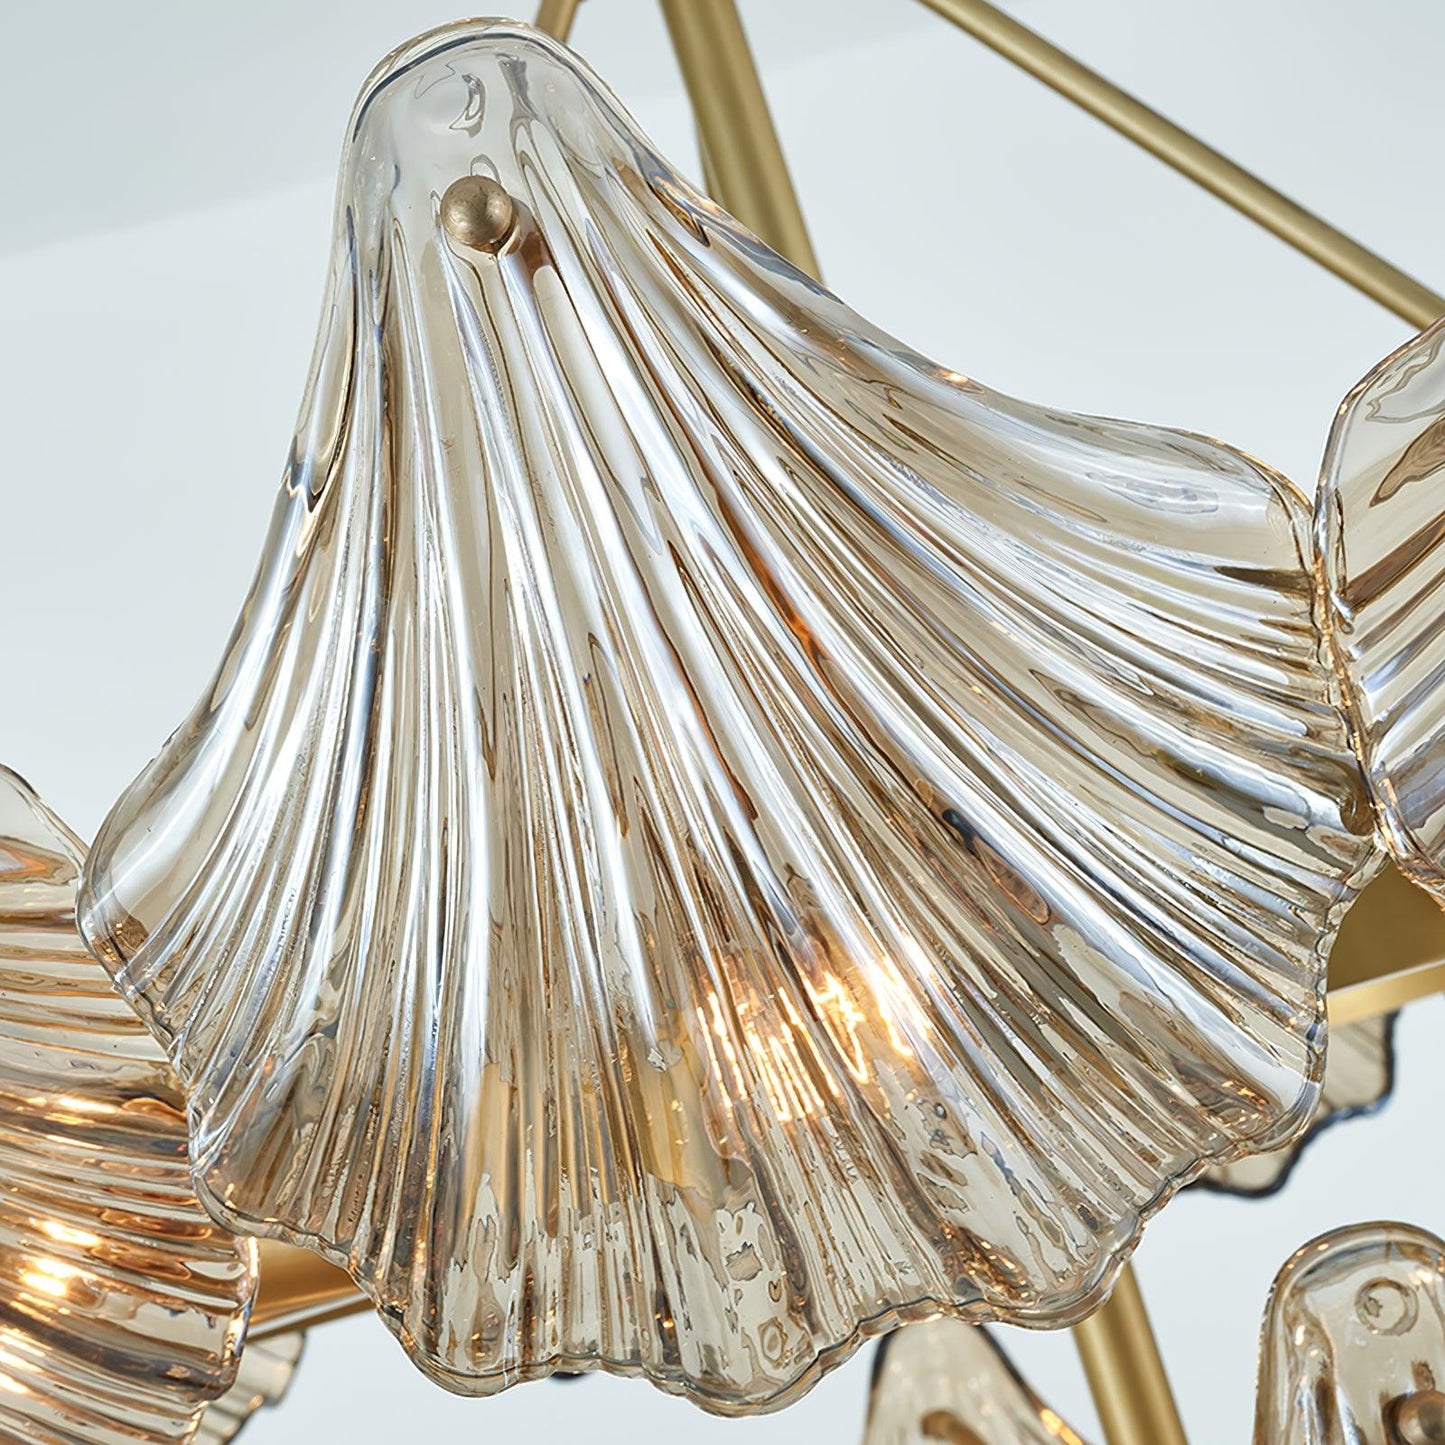 Shell Crystal Chandelier